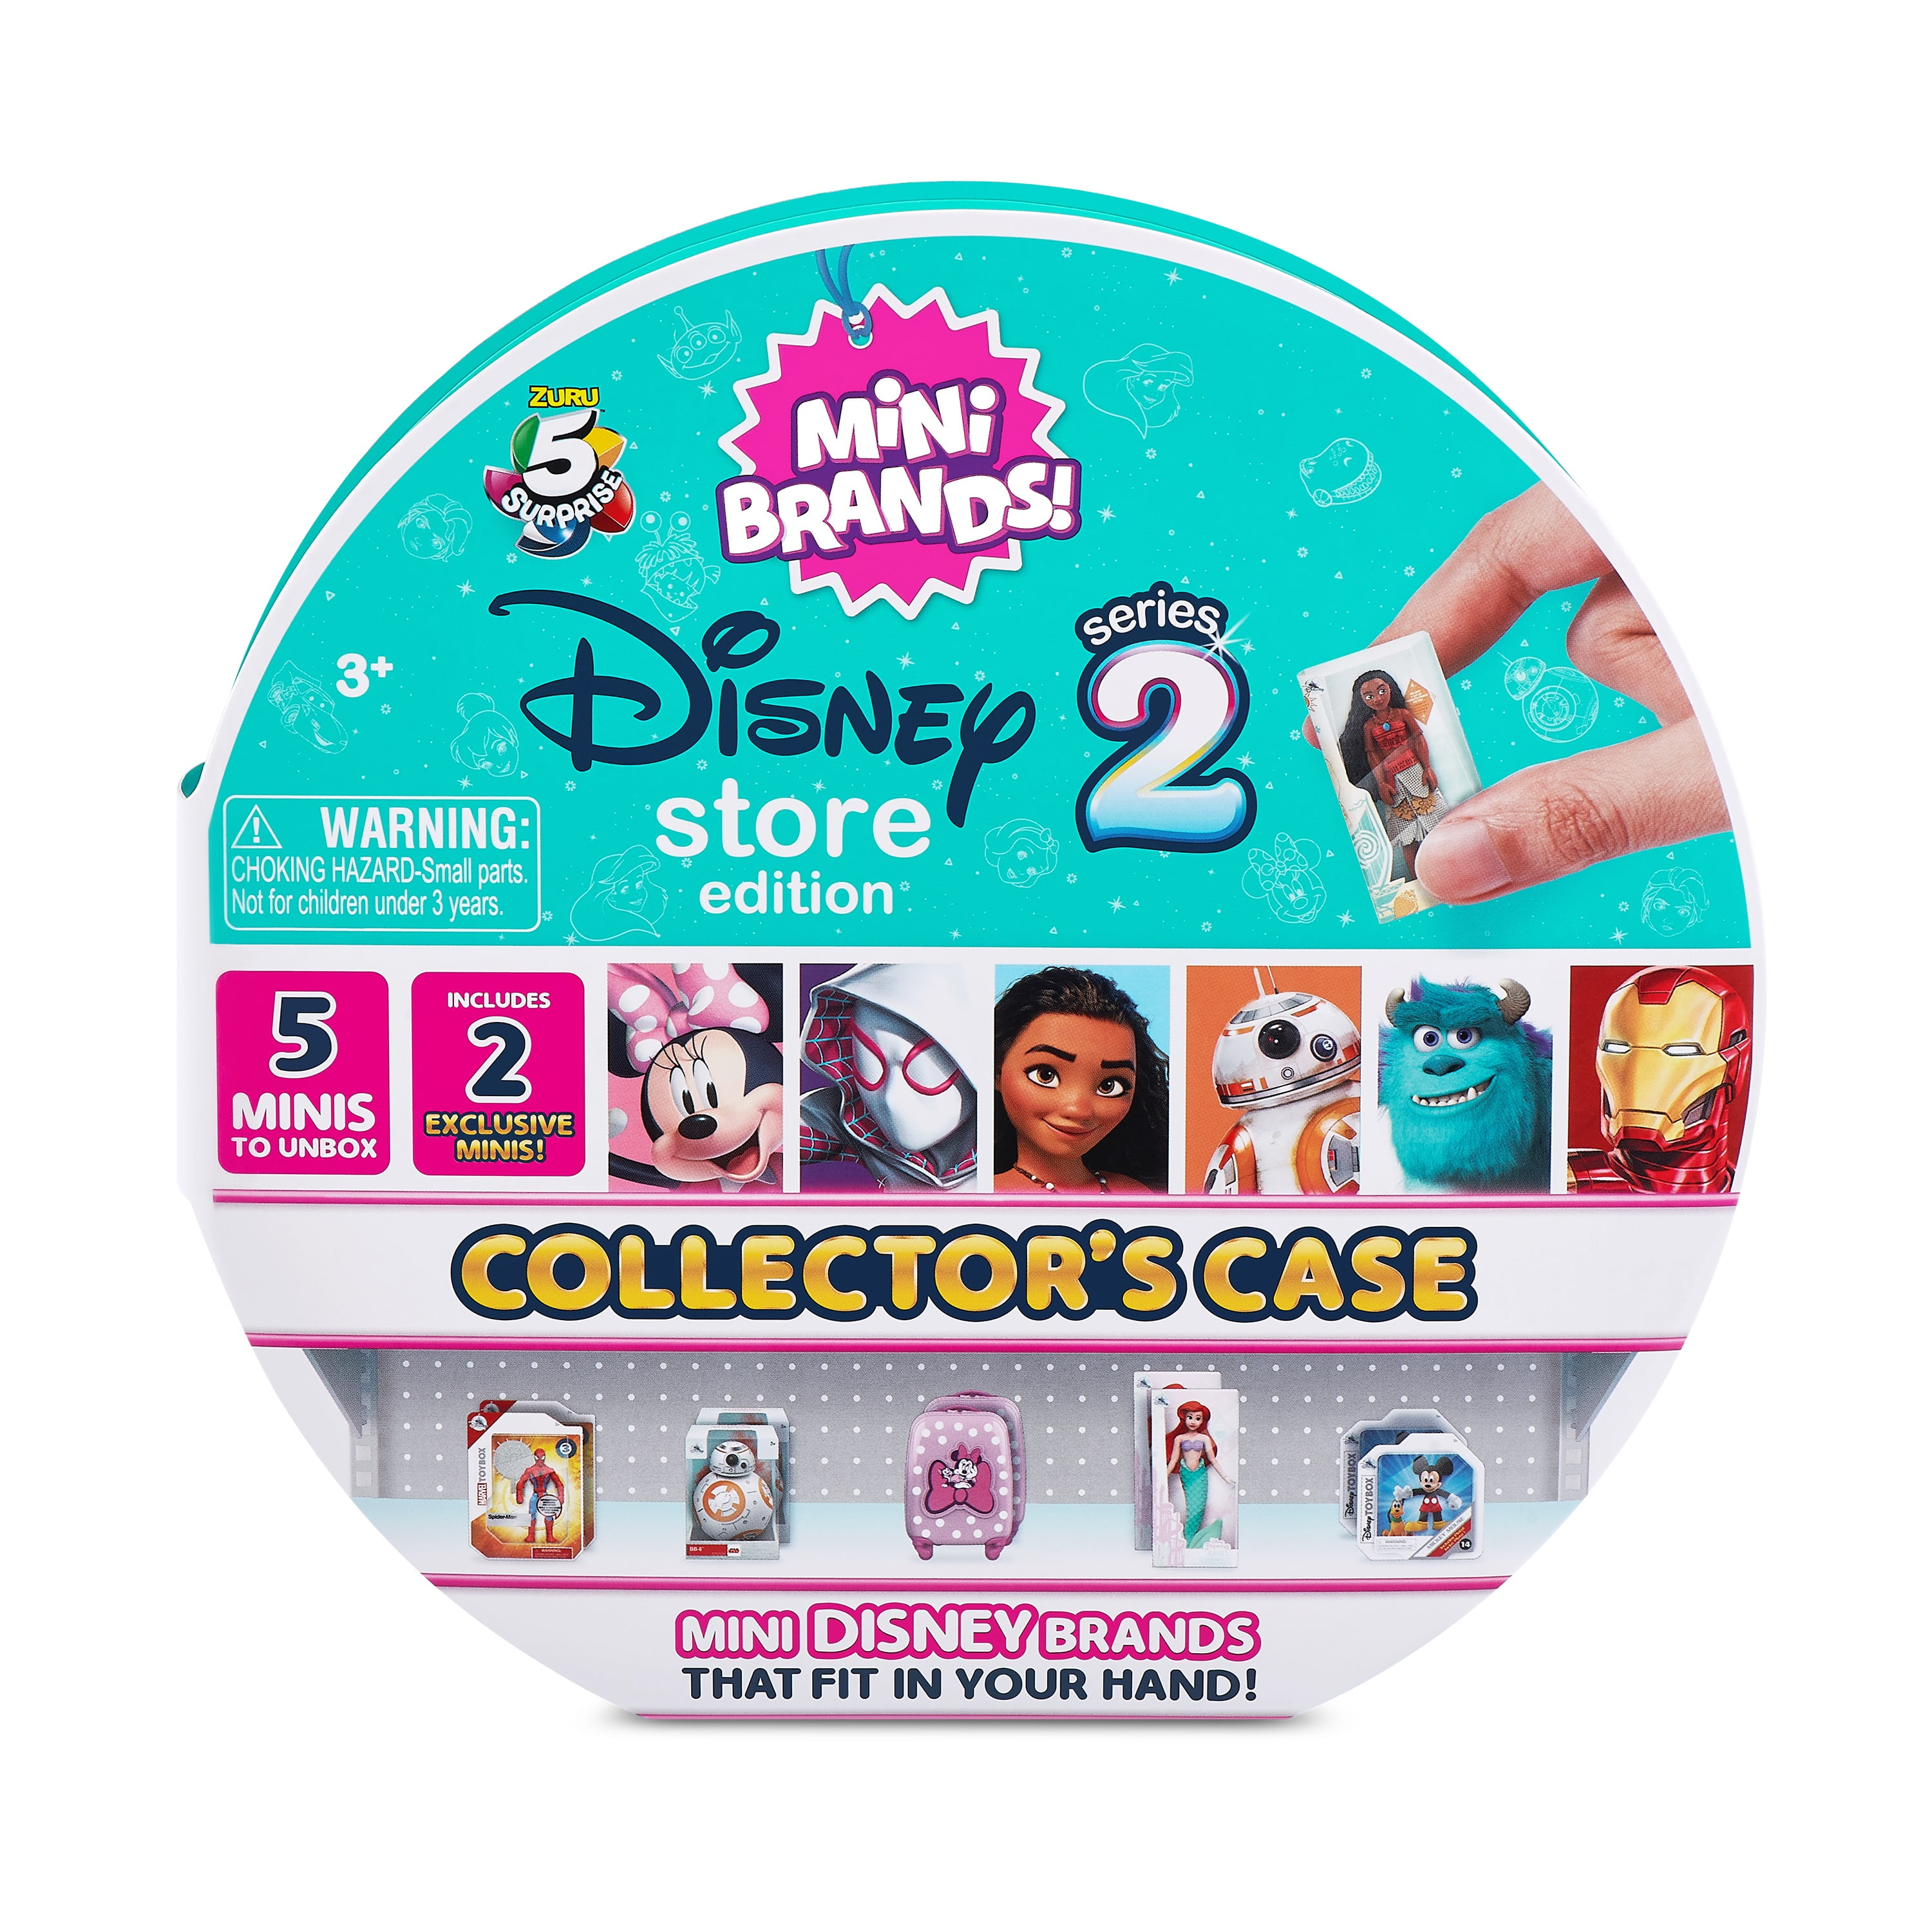 5 Surprise Disney Mini Brands Series 2 Collector's Kit by ZURU (3 Capsules  + 1 Collector's Case)  Exclusive Mystery Capsule Real Miniature